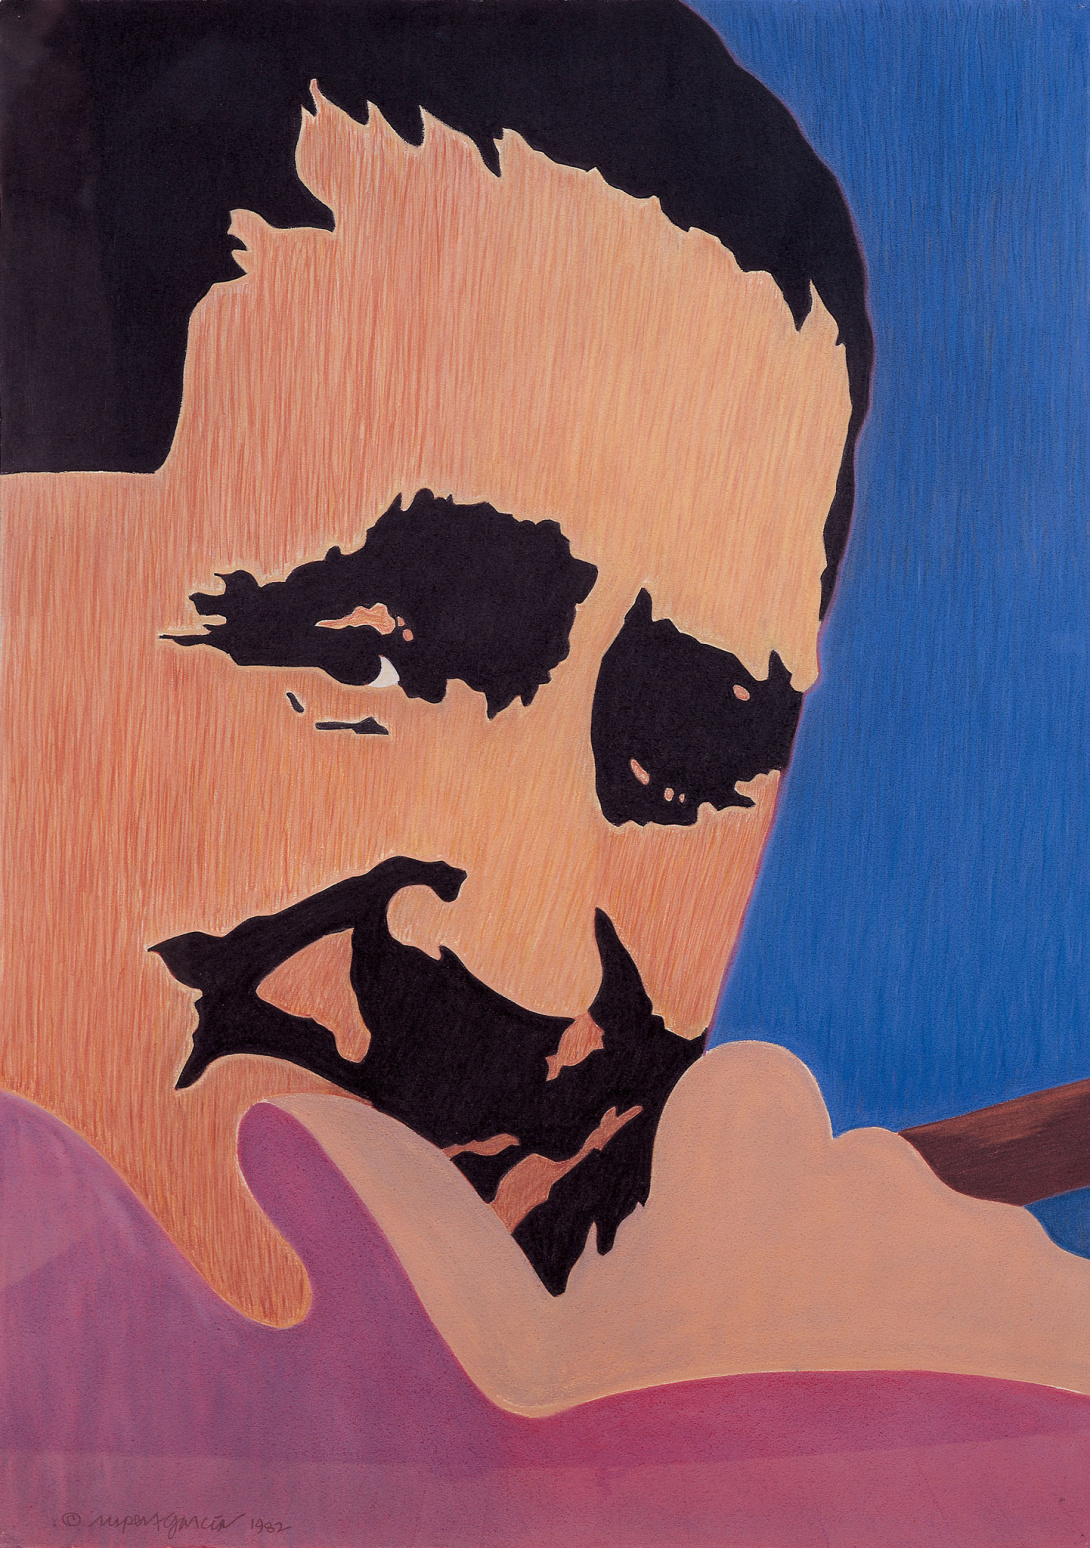 Pensive portrait of the German playwright and poet. Turned toward the viewer, Brecht is holding a cigar, thumb to his chin. The details of his hair, bushy brows, and shadows around his nose and mouth are formed with stark black.